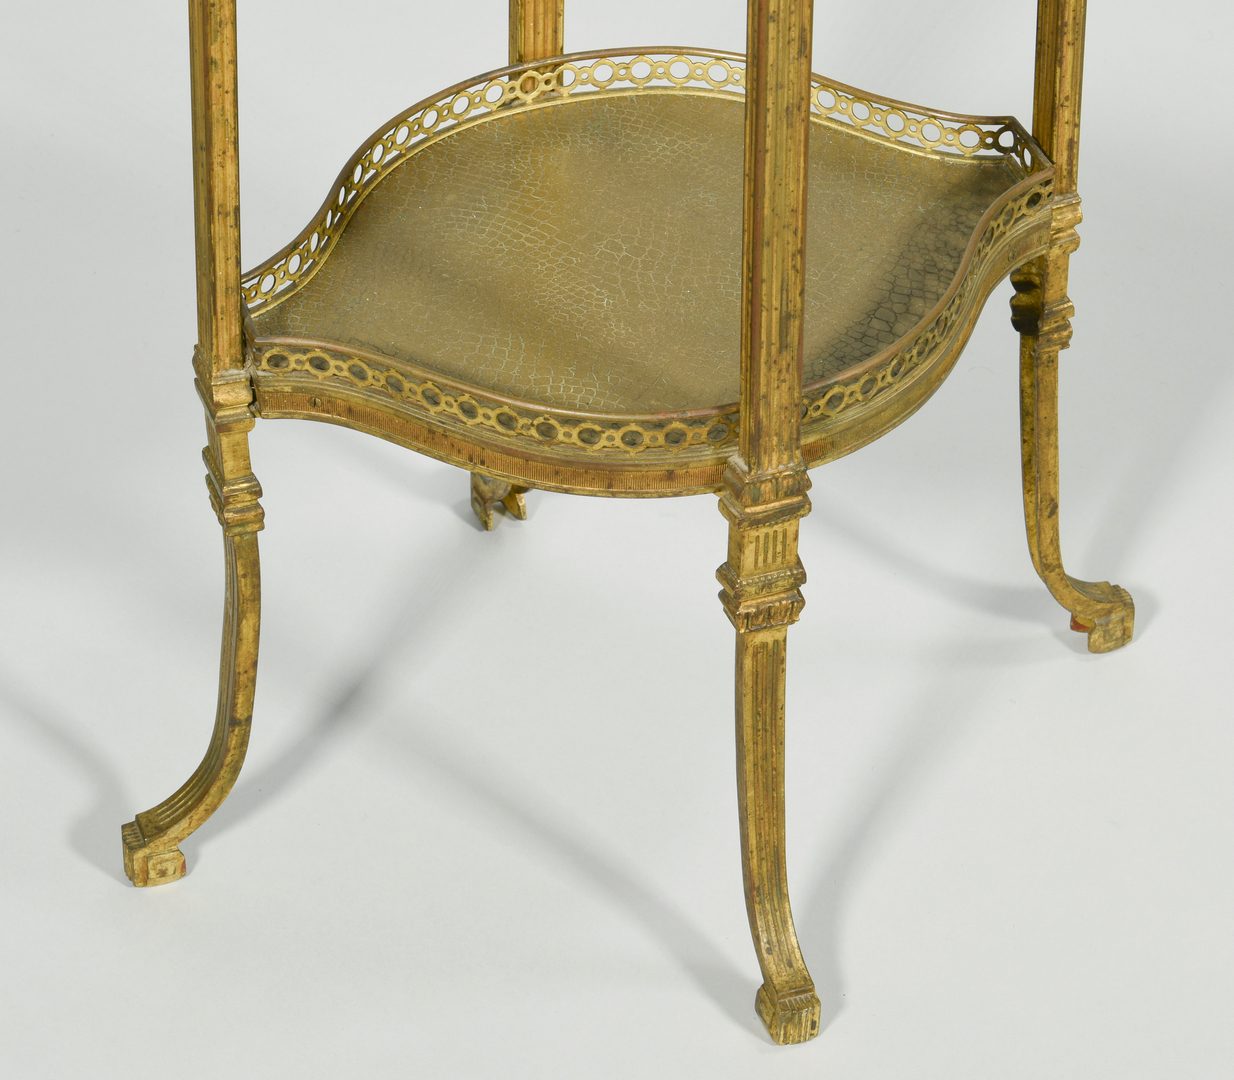 Lot 590: French Giltwood Pedestal or Plant Stand